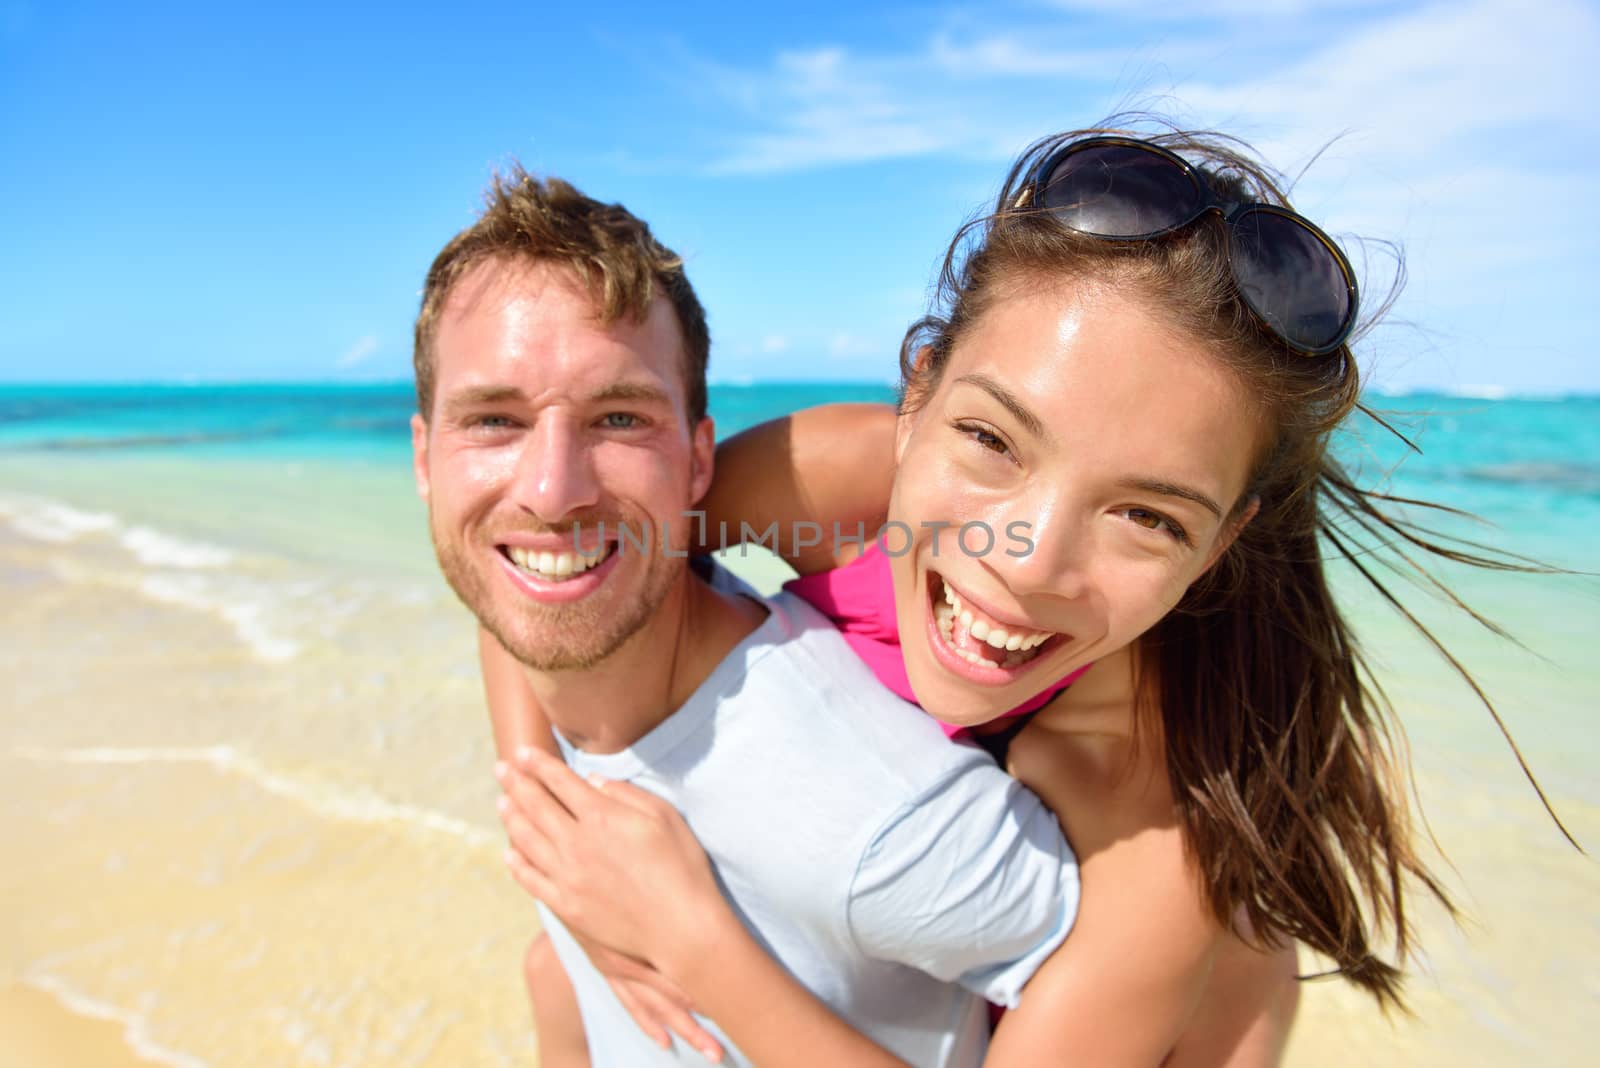 Young couple having fun laughing on beach holidays. Beautiful Asian mixed race woman piggybacking on Caucasian male excited at camera portrait. Multicultural, multiethnic, multiracial people.